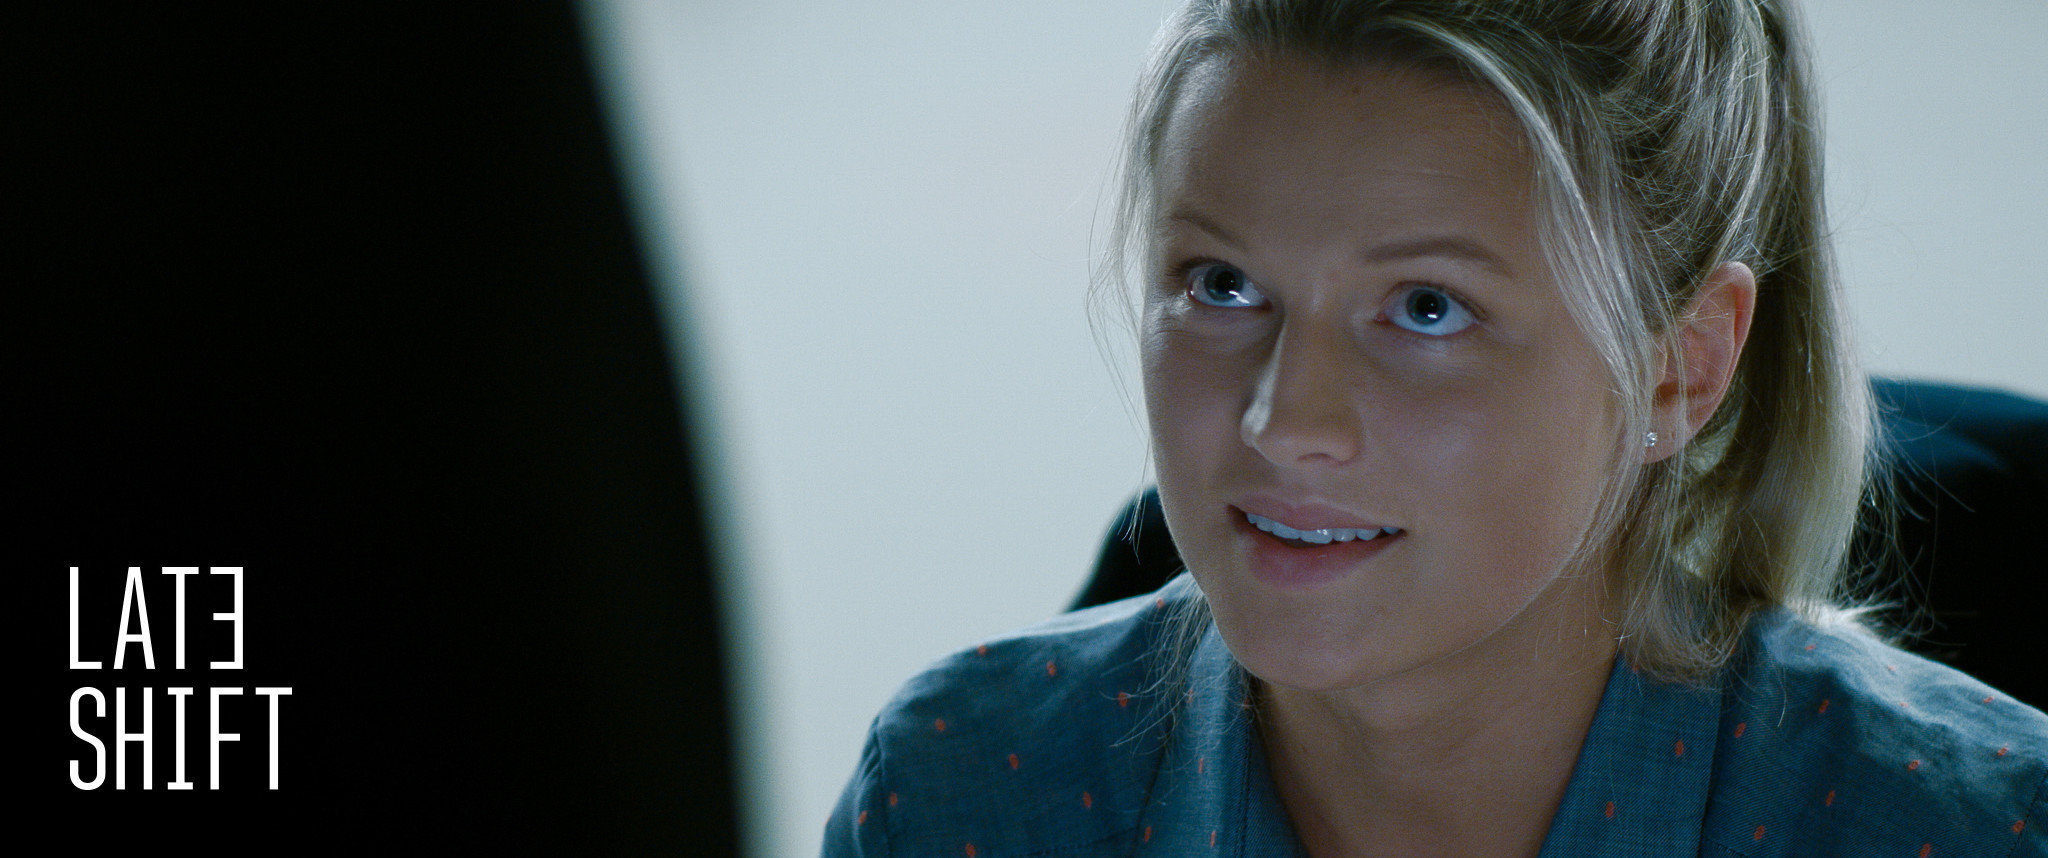 LATE SHIFT movie still. Lily Travers as Elodie.